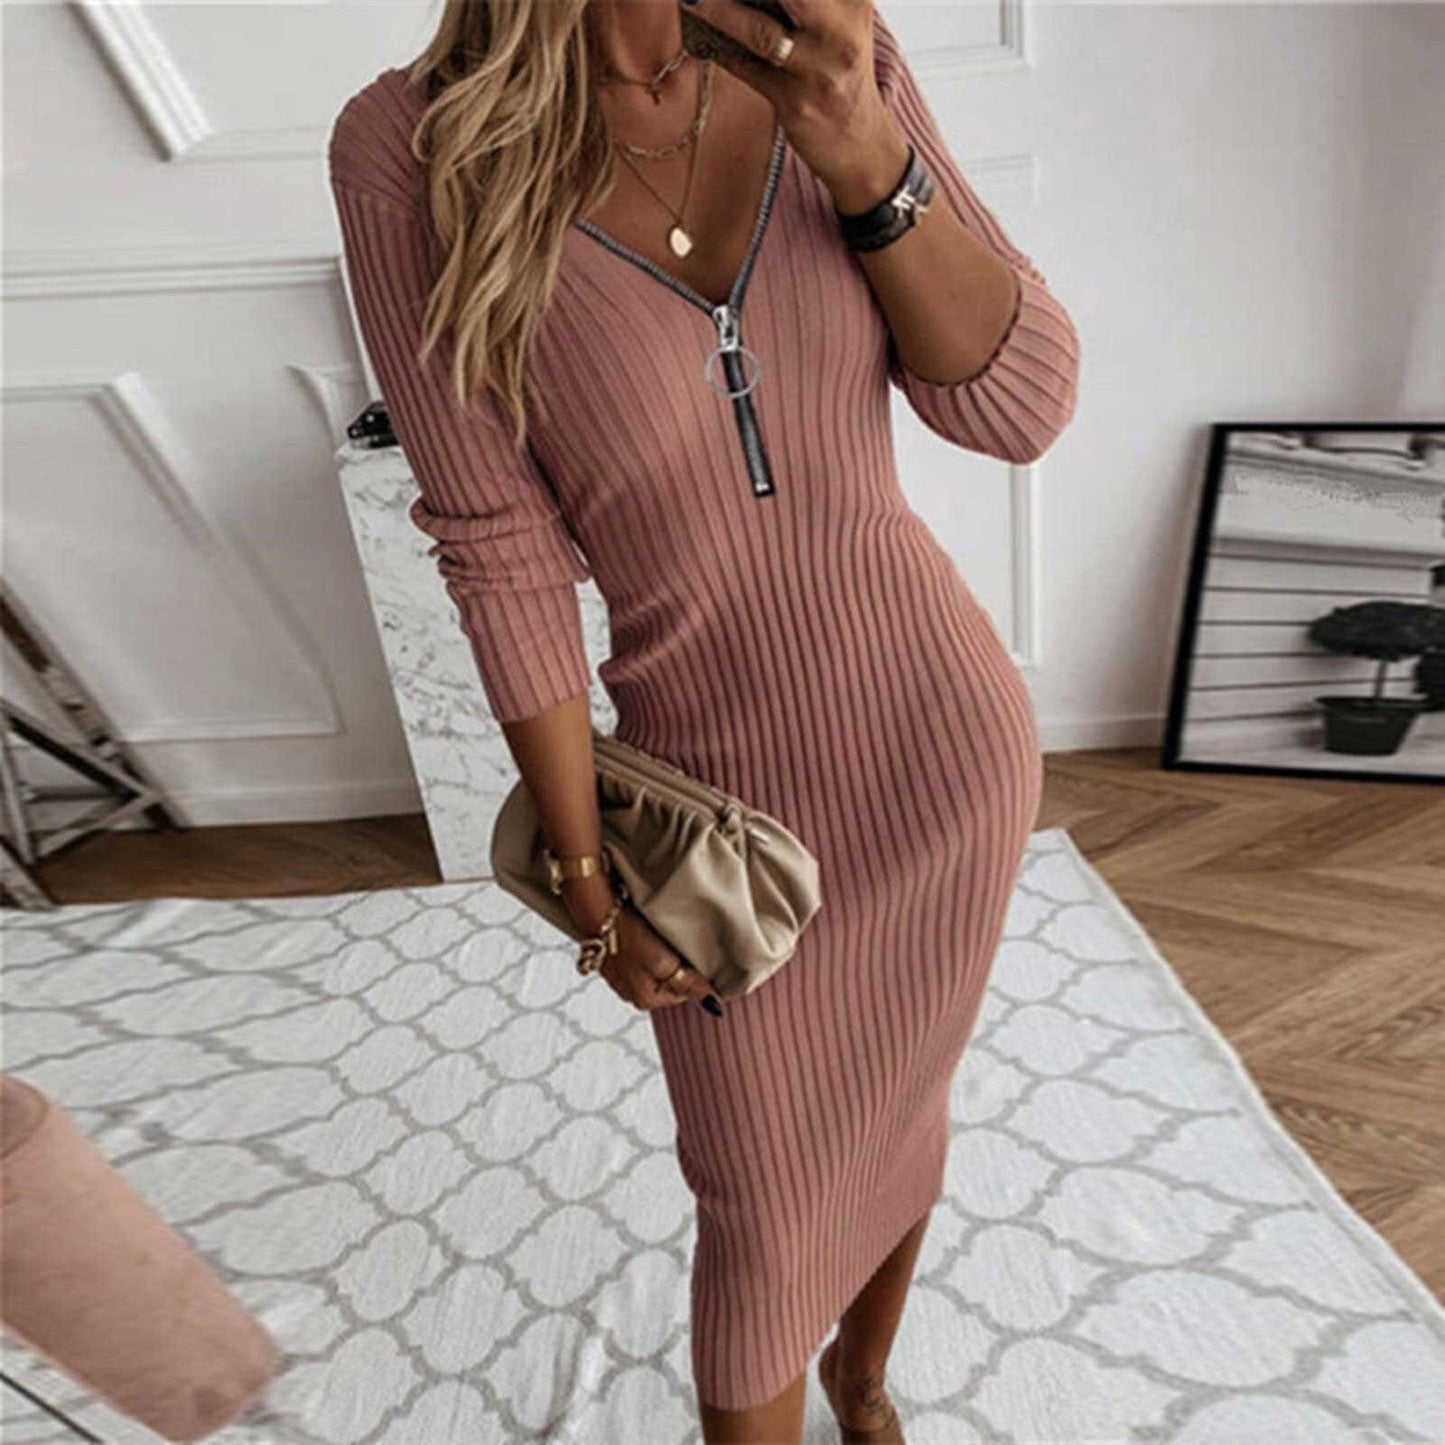 Autumn V-neck Fashion Casual Long Sleeve Party Bodycon Ribbed Knit Dress Women Autumn Winter Solid Slim Midi Women Sweater Dress - Dresses